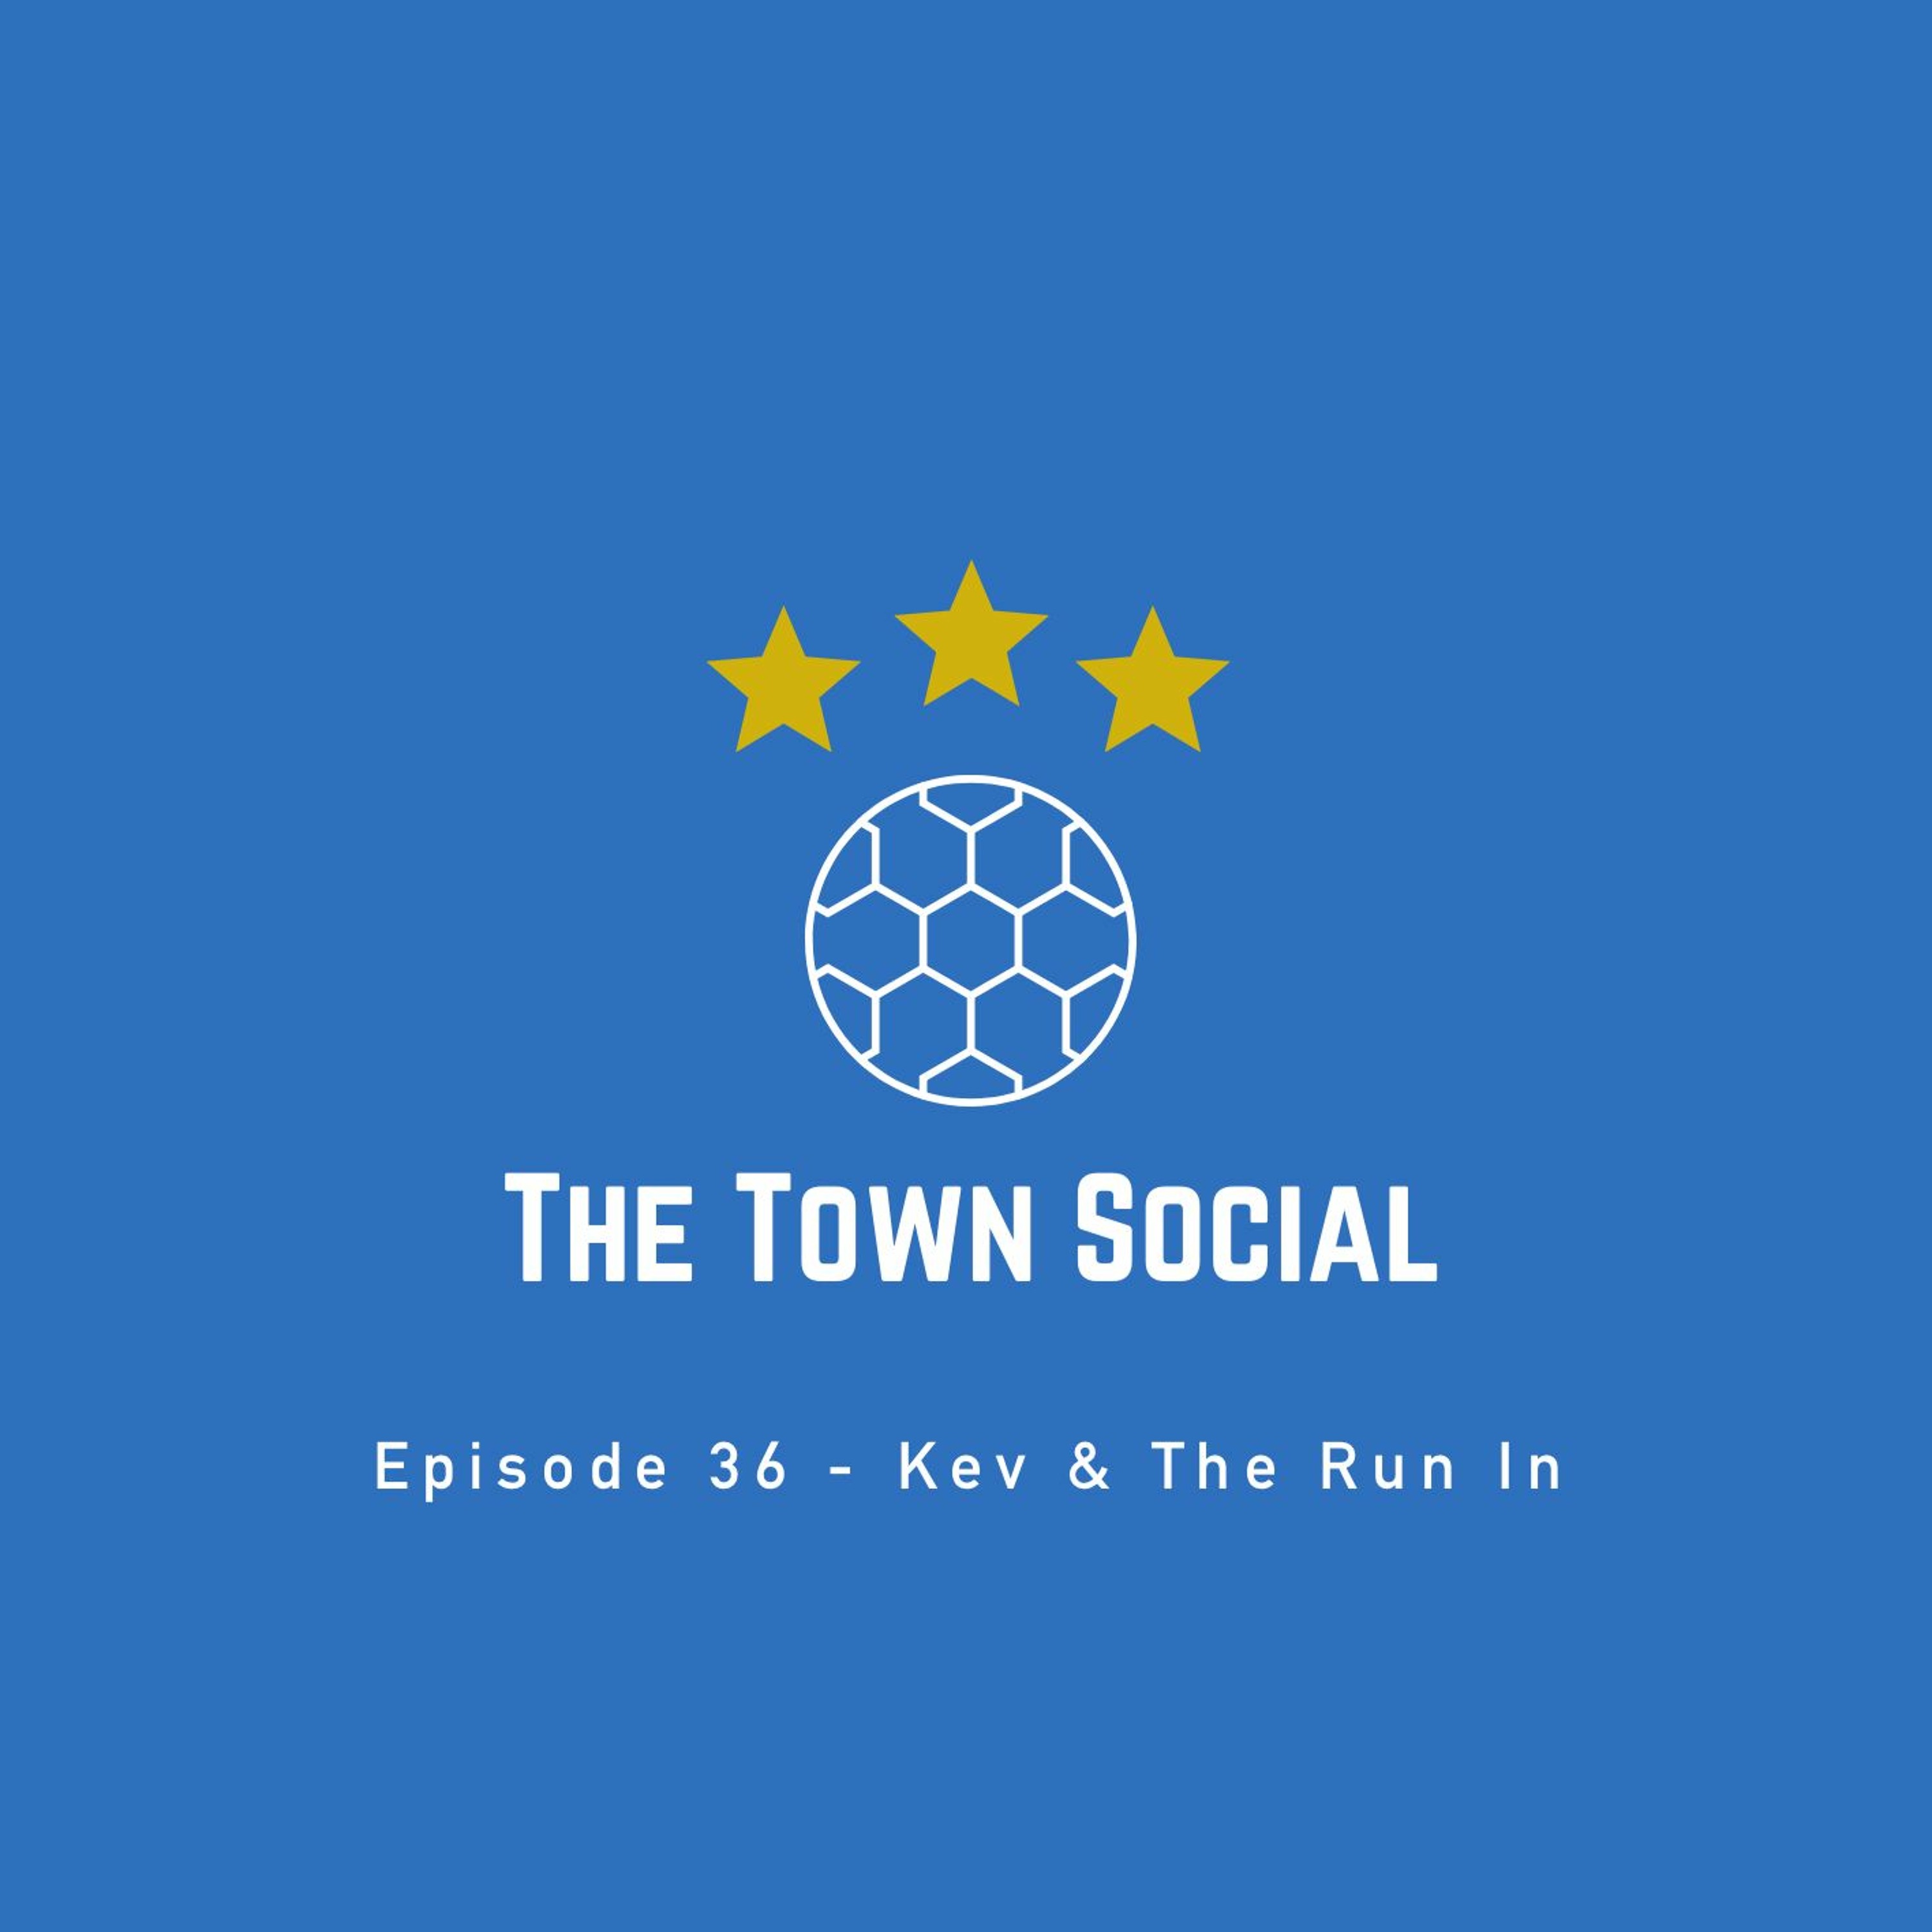 Kev & The Run In - The Town Social - Episode 36